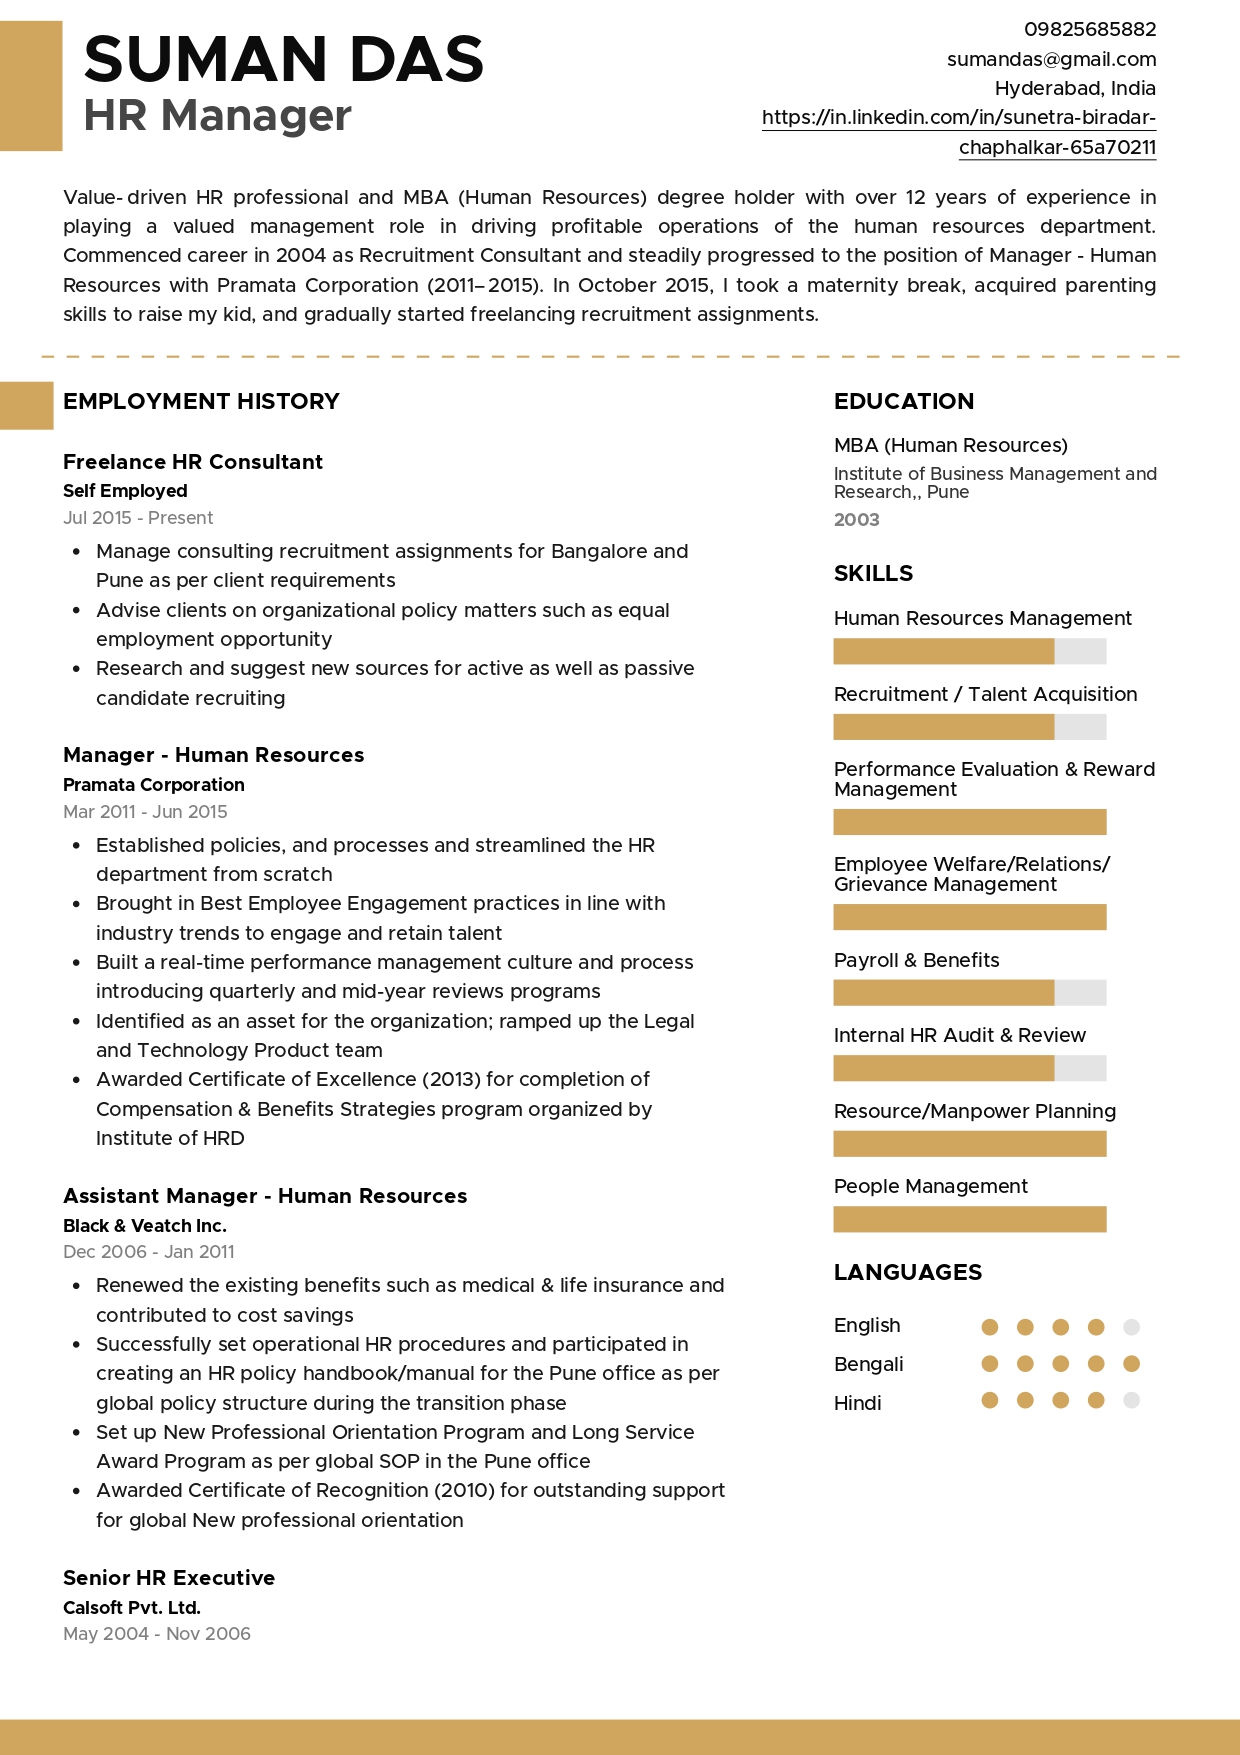 Resume of HR Manager with Career Break